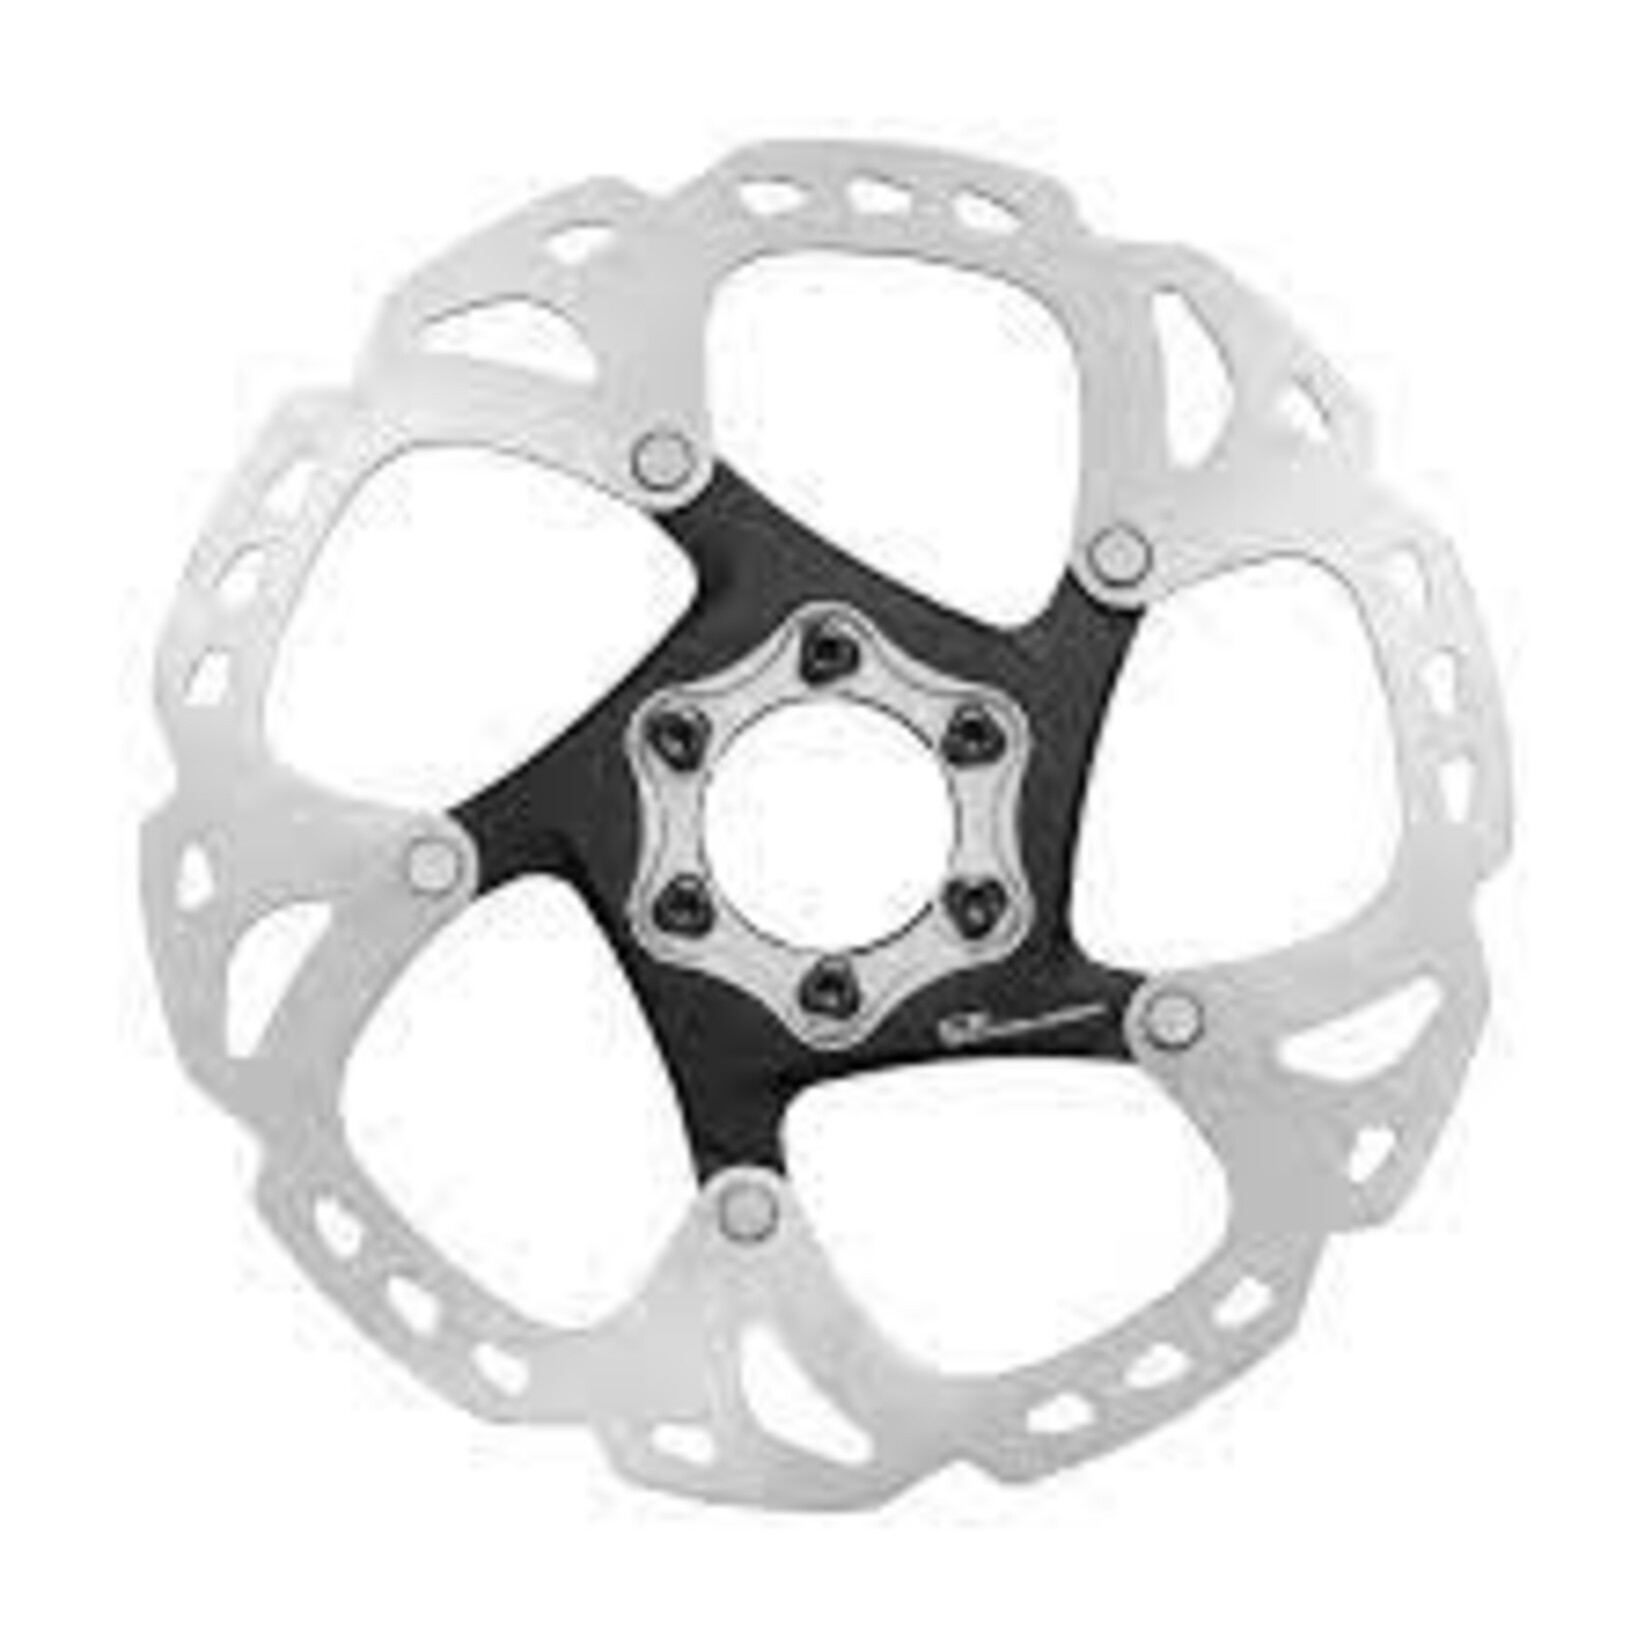 Shimano ROTOR FOR DISC BRAKE, SM-RT86, S 160MM, 6-BOLT TYPE